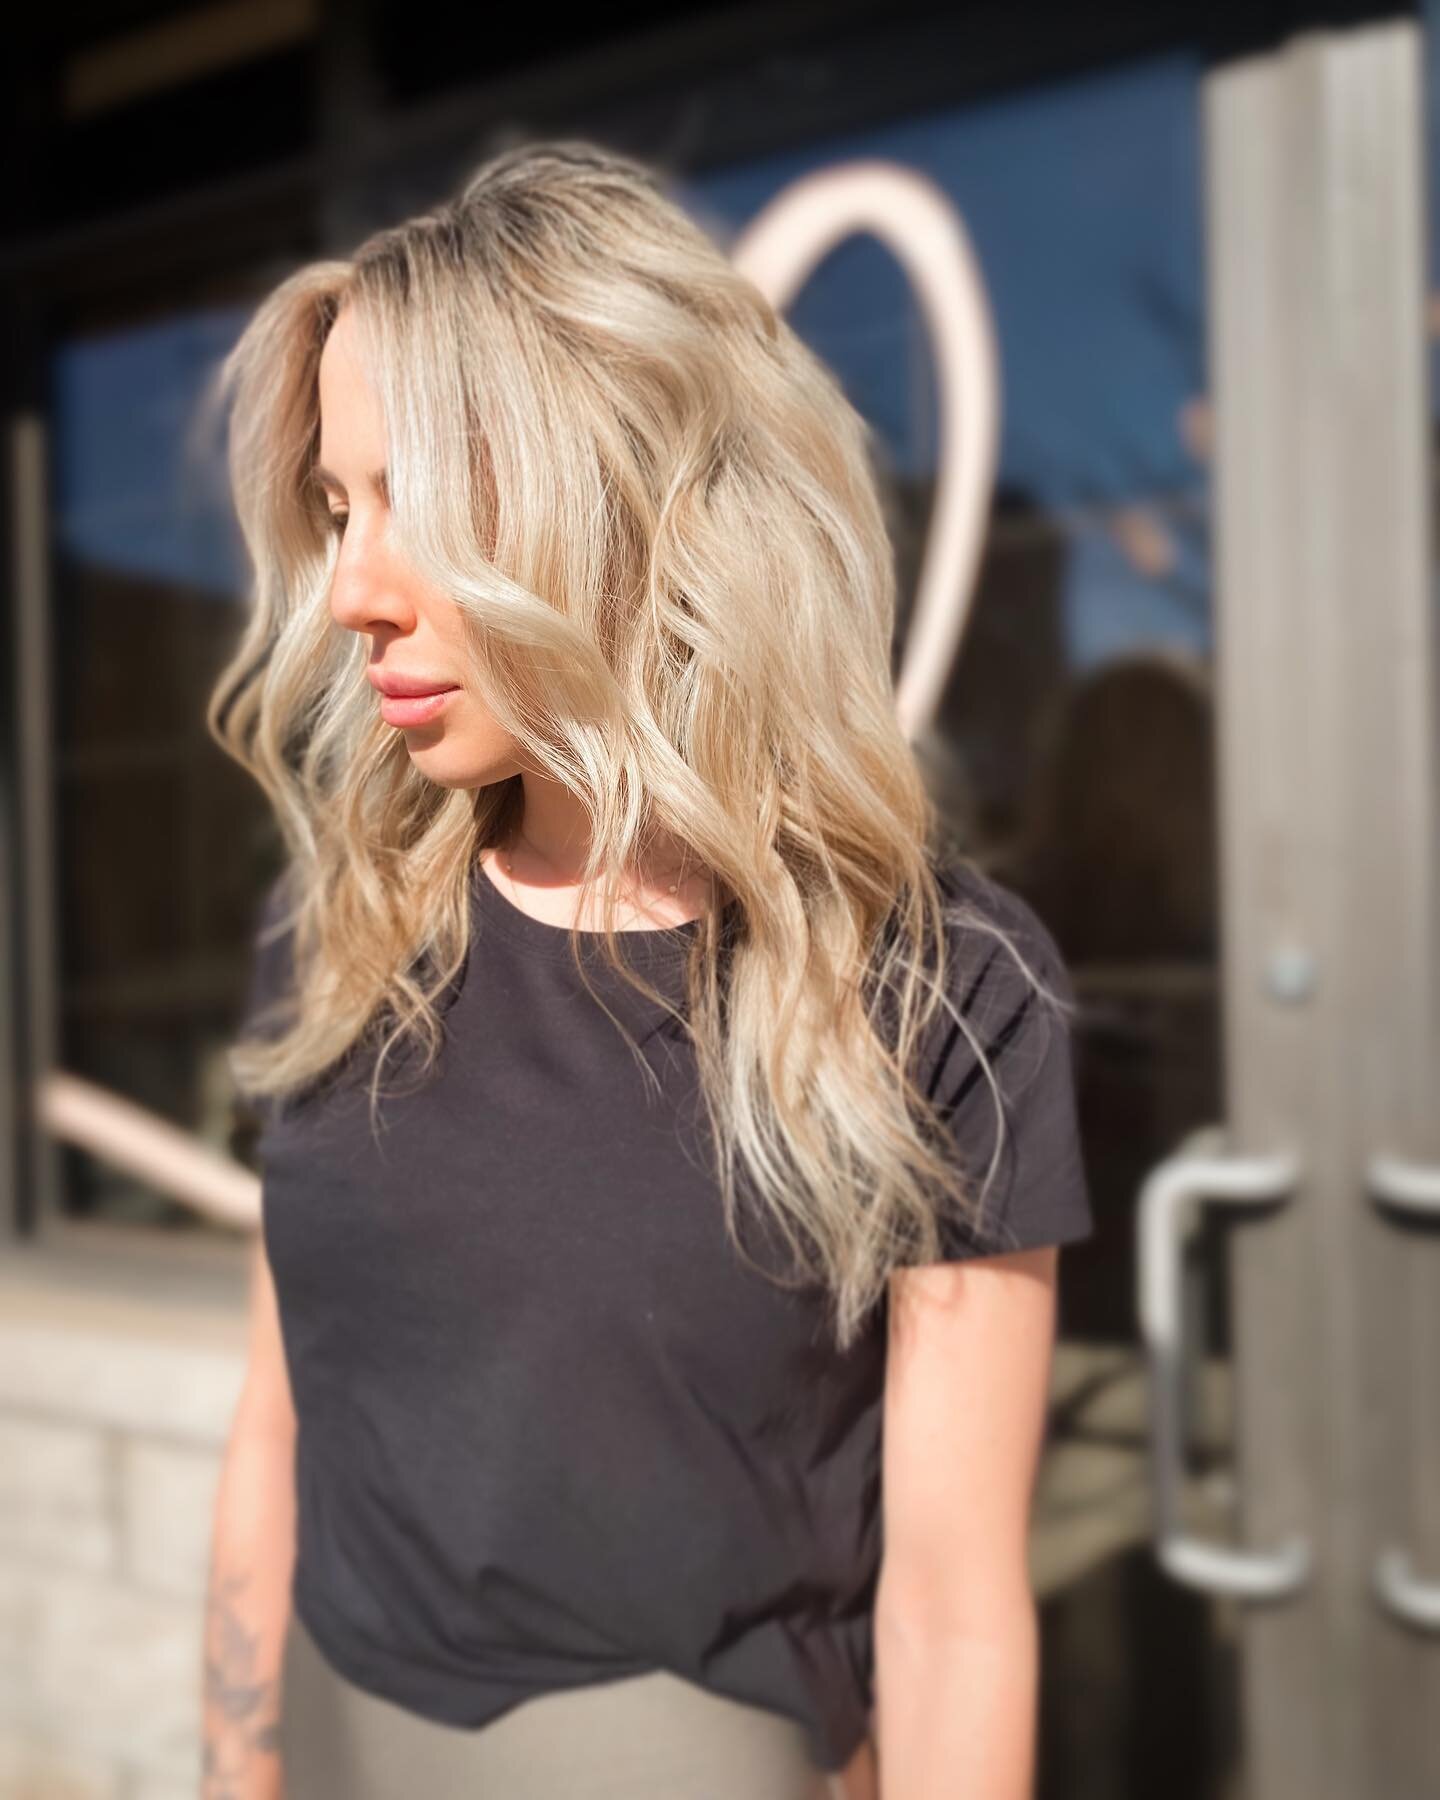 My Blonde Ray of Sunshine ☀️ 💗

&bull;
&bull;
@brittanydmorgan ❤️

&bull;
&bull;
#behindthechair #behindthechairfirstfeature #mastersofbalayage #balayage #foilayage #blonde #burlingtonontario #burlingtonblonde#gtahairstylist #gtablondespecialist #re